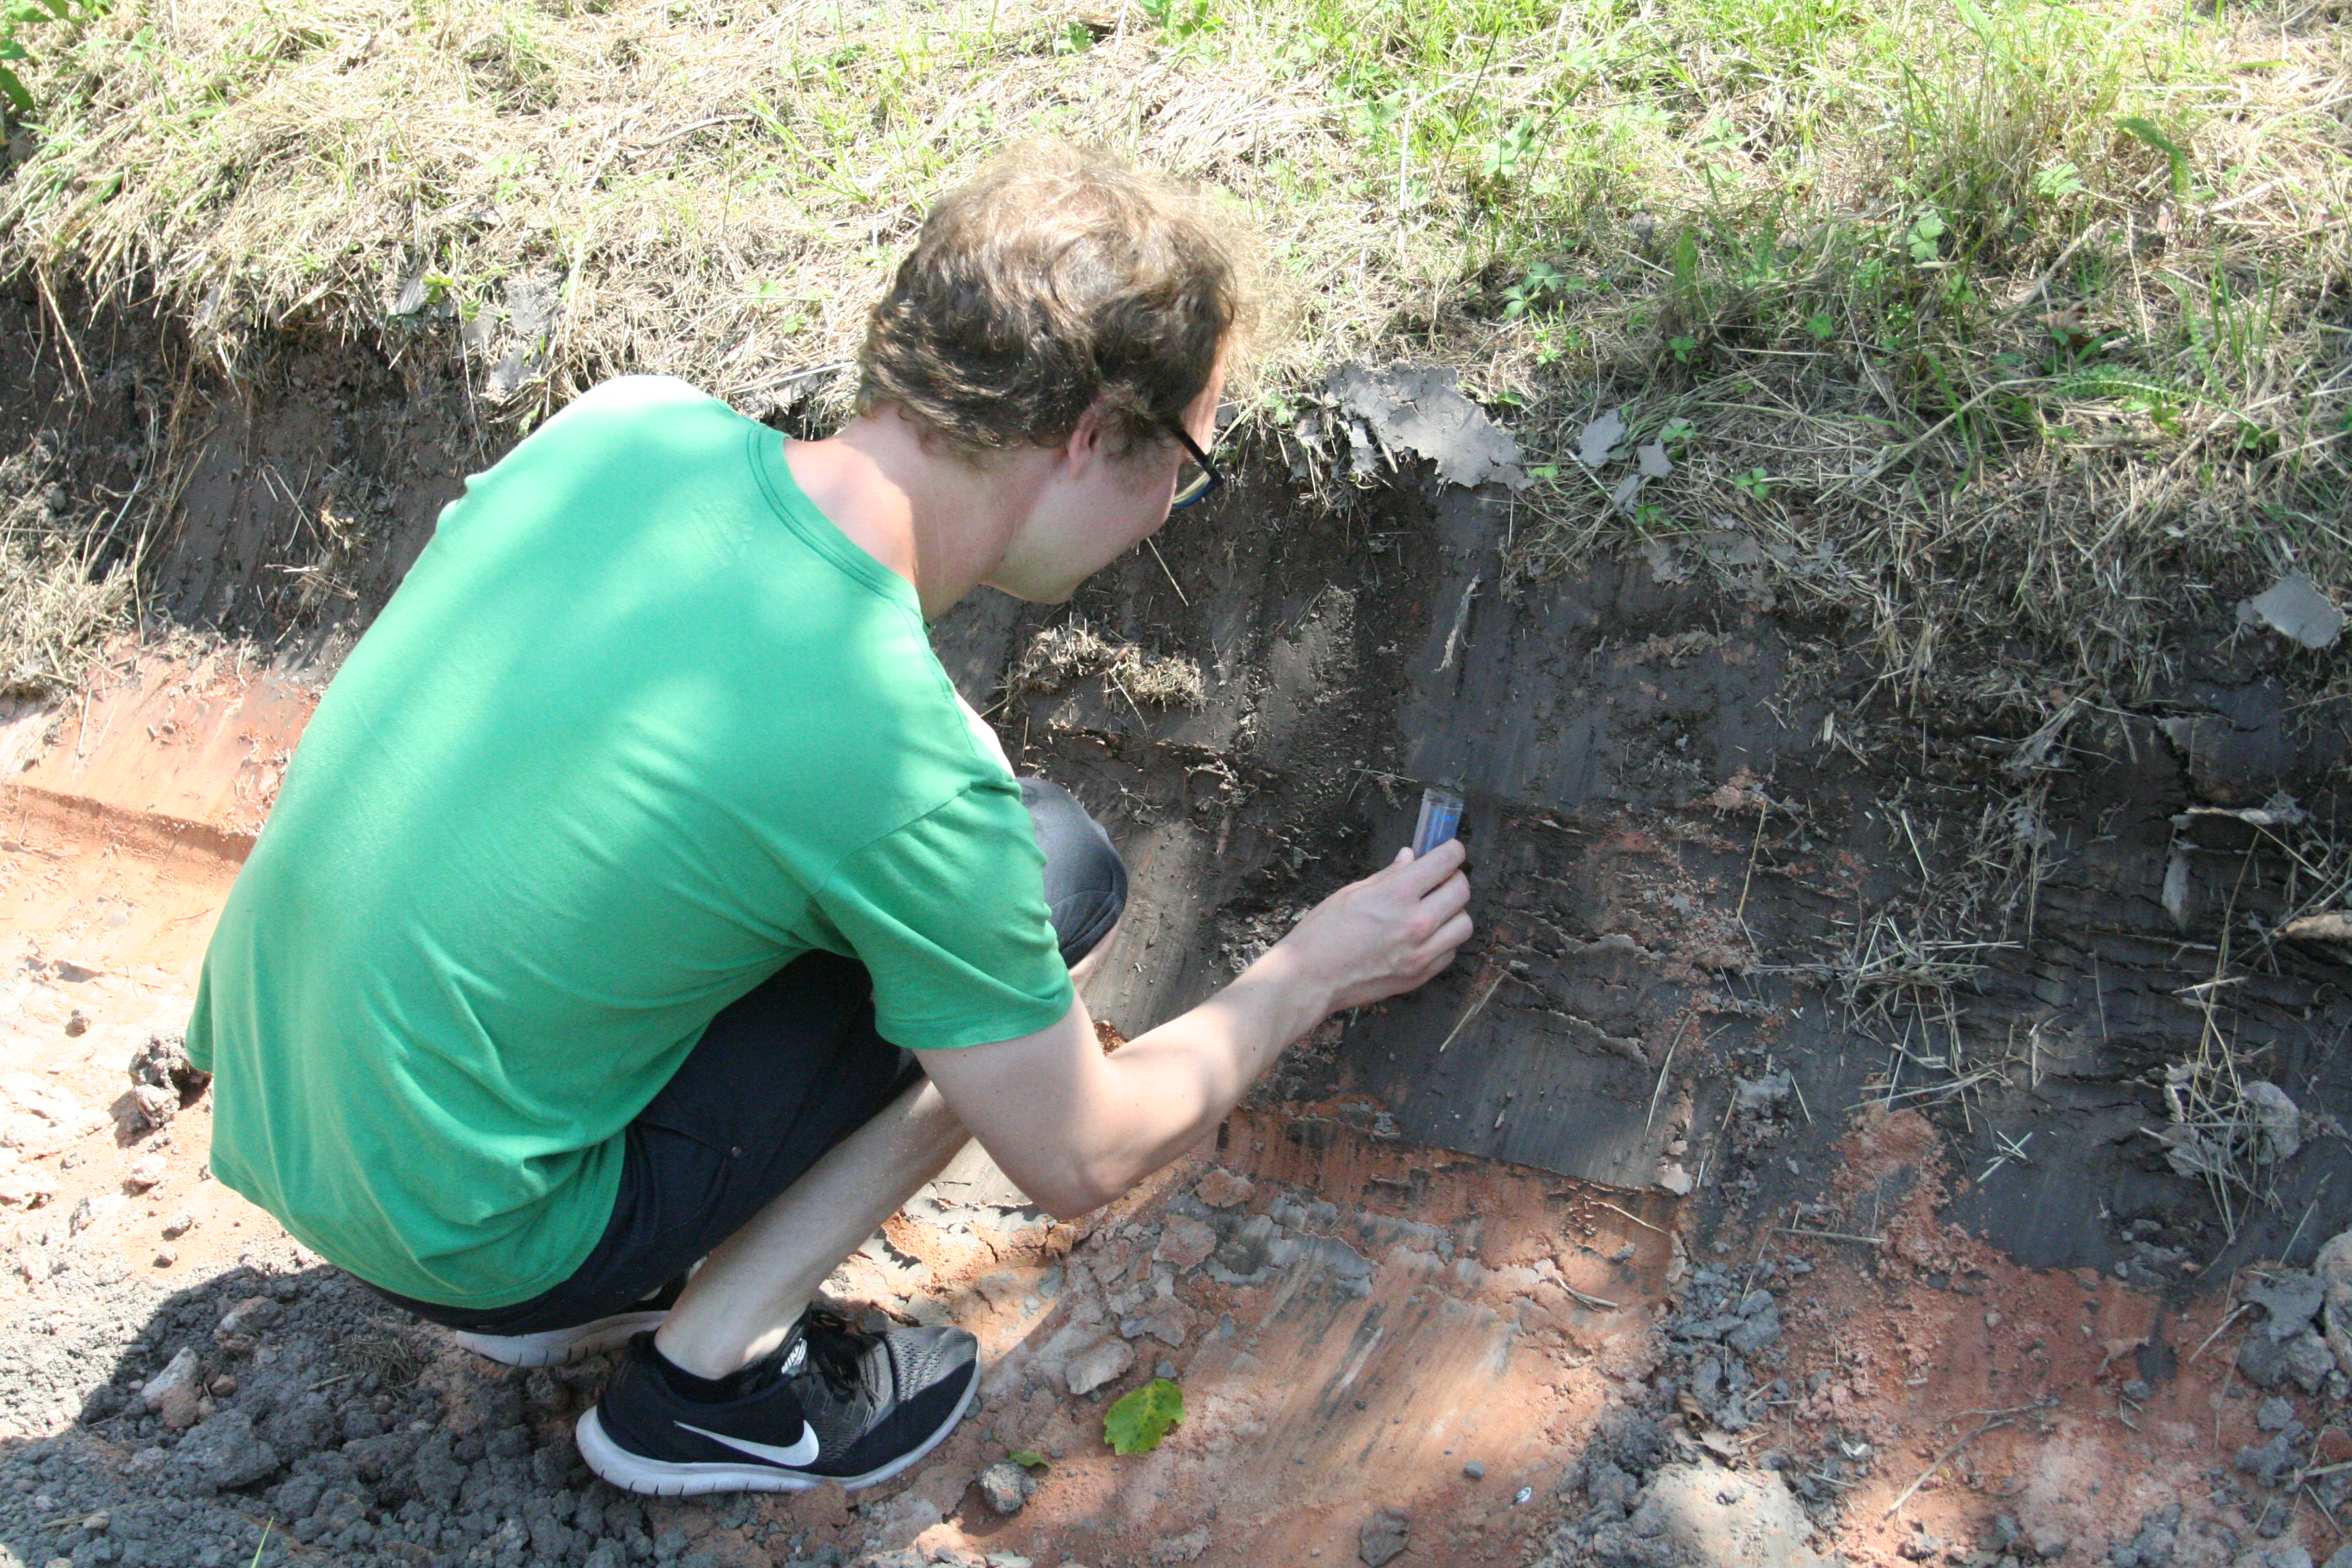 Master student Julian Thimm collects a soil sample